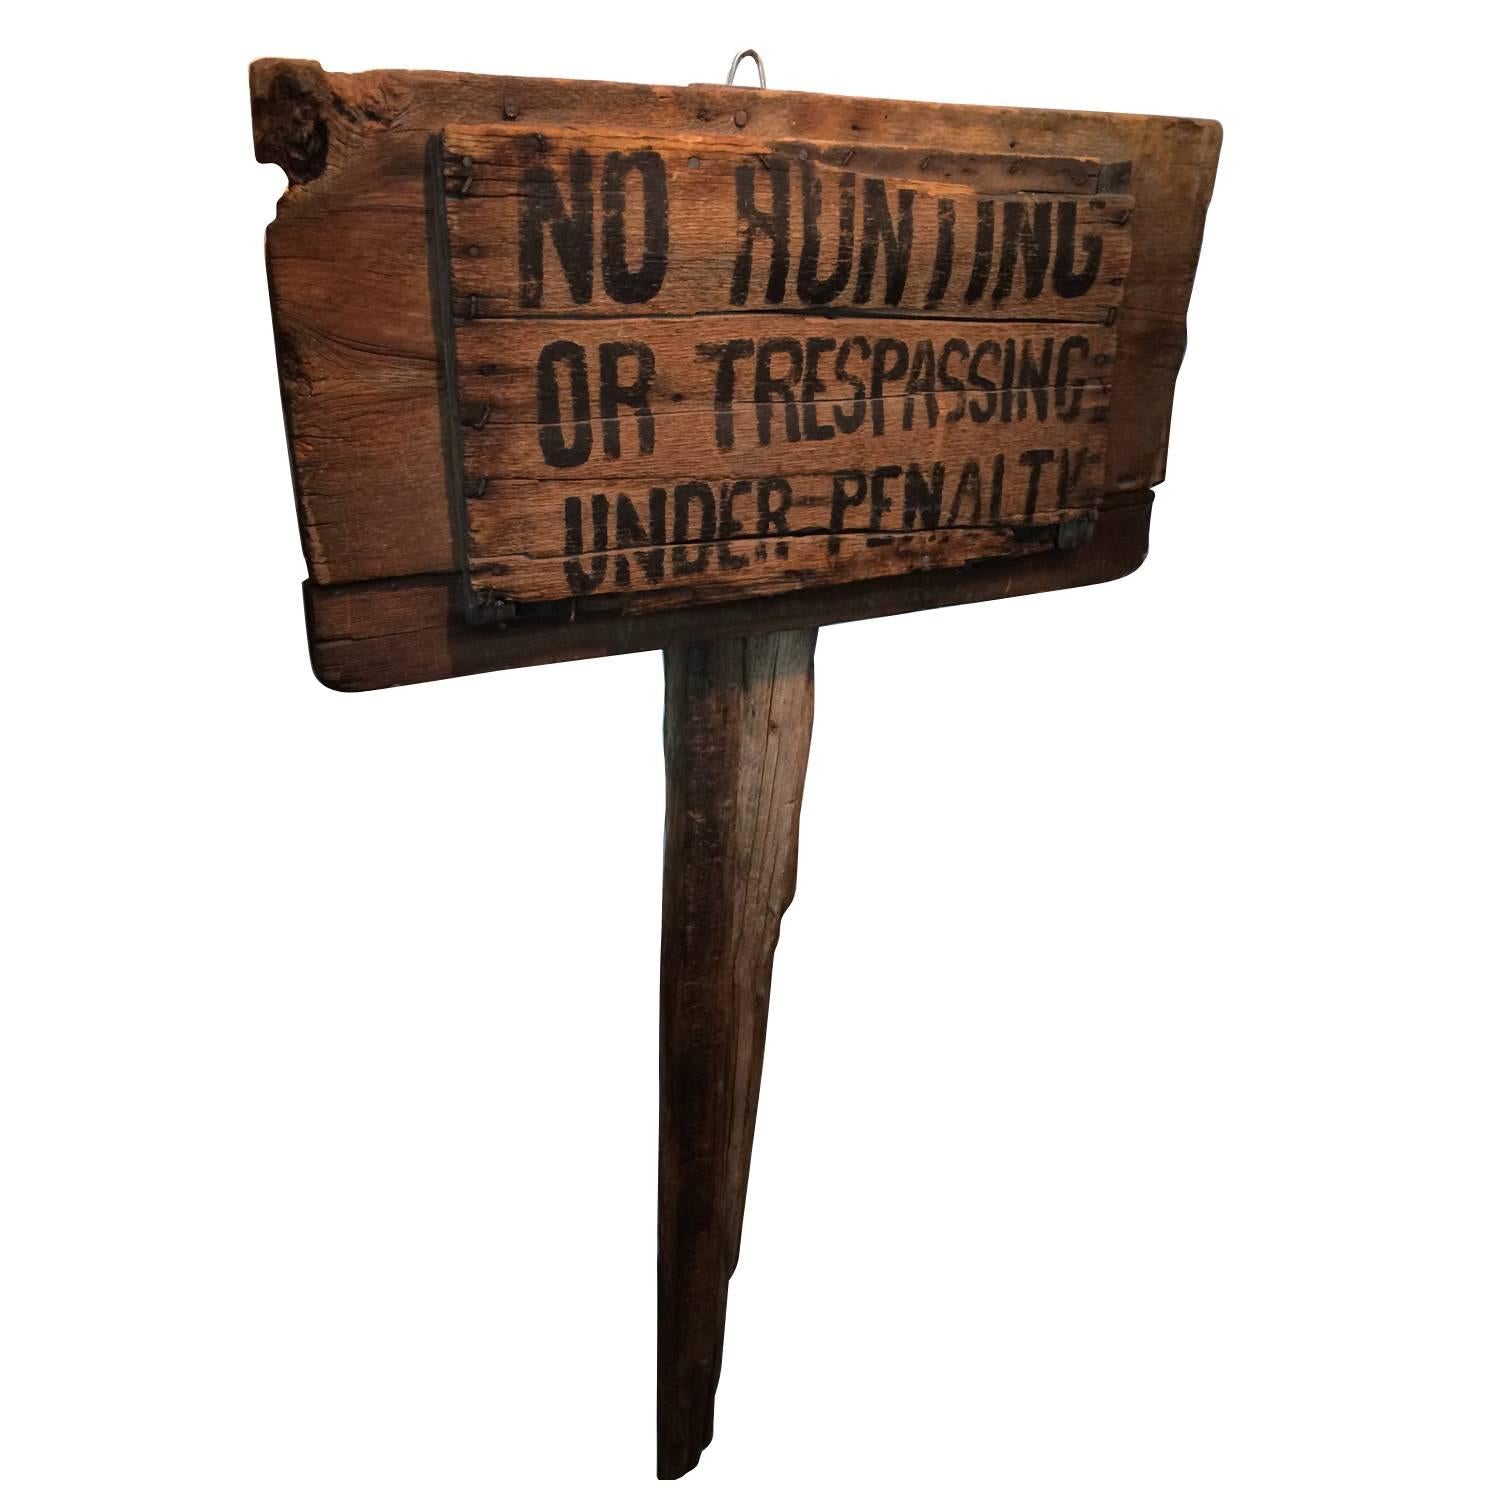 Wonderful vintage no hunting sign picked up from a rural farm in Illinois.